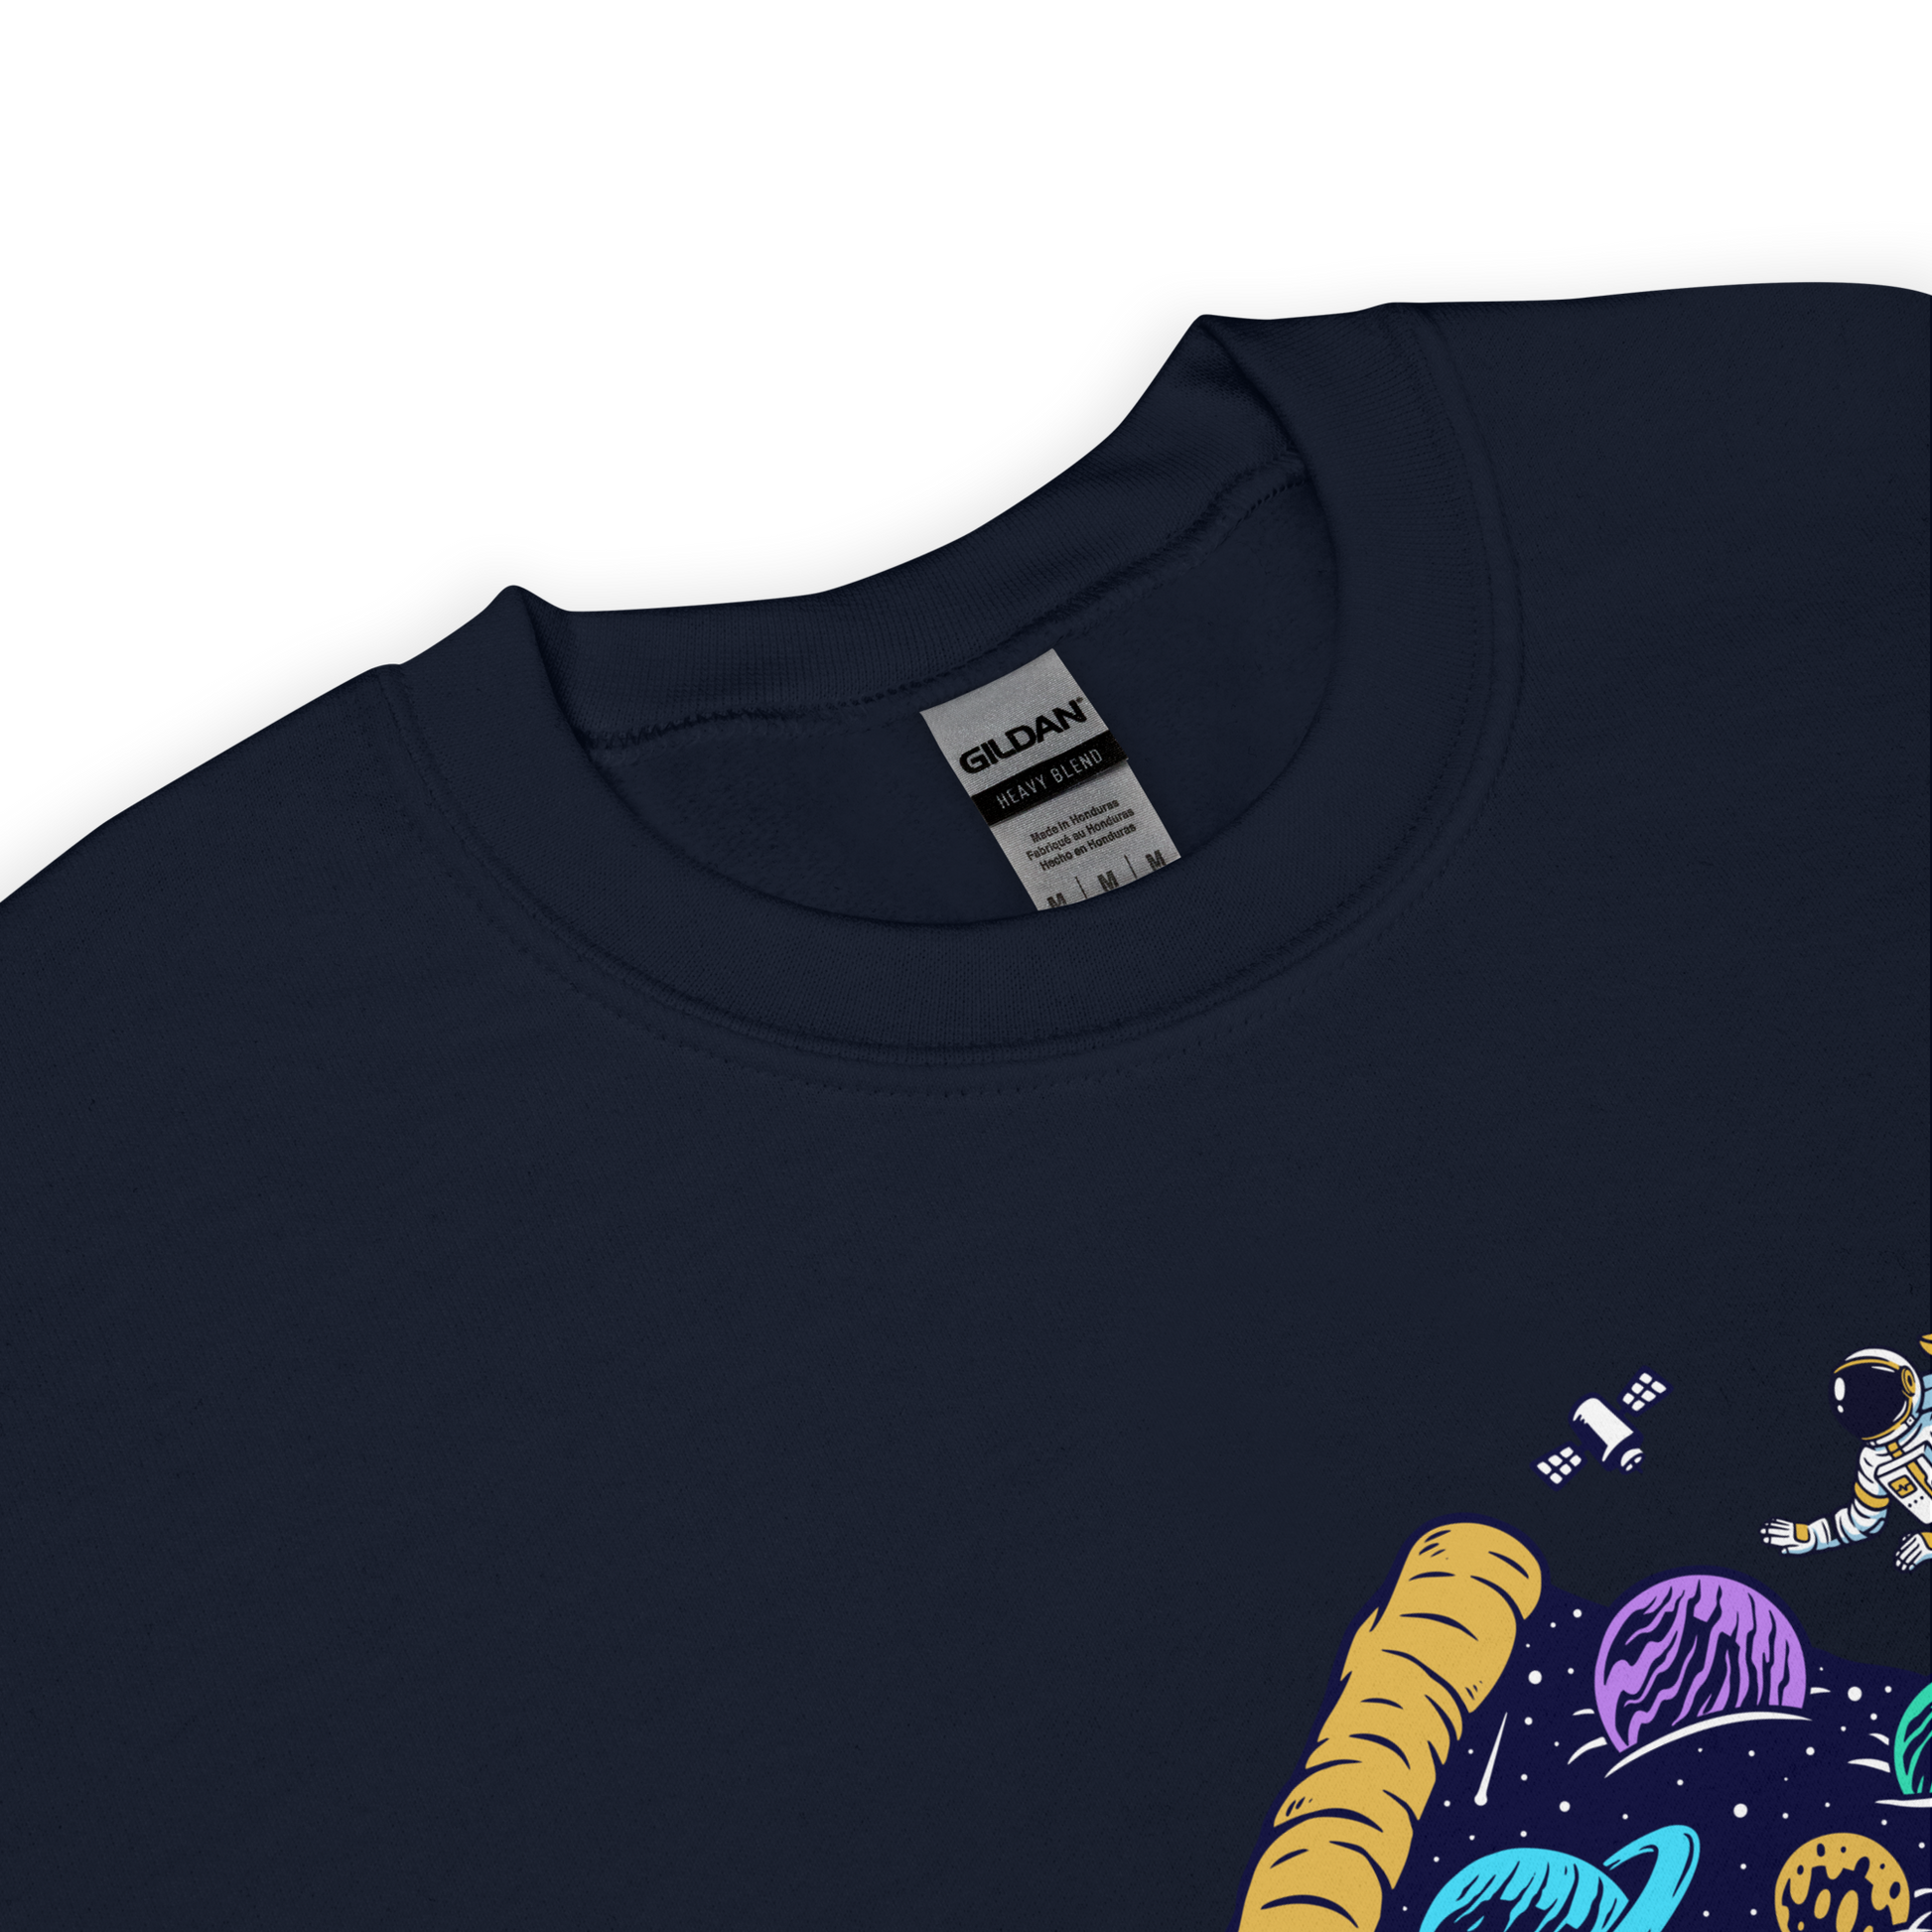 Product details of a Navy Cosmic Cravings Sweatshirt featuring an Astronaut Exploring a Pizza Universe graphic on the chest - Funny Graphic Space Sweatshirts - Boozy Fox